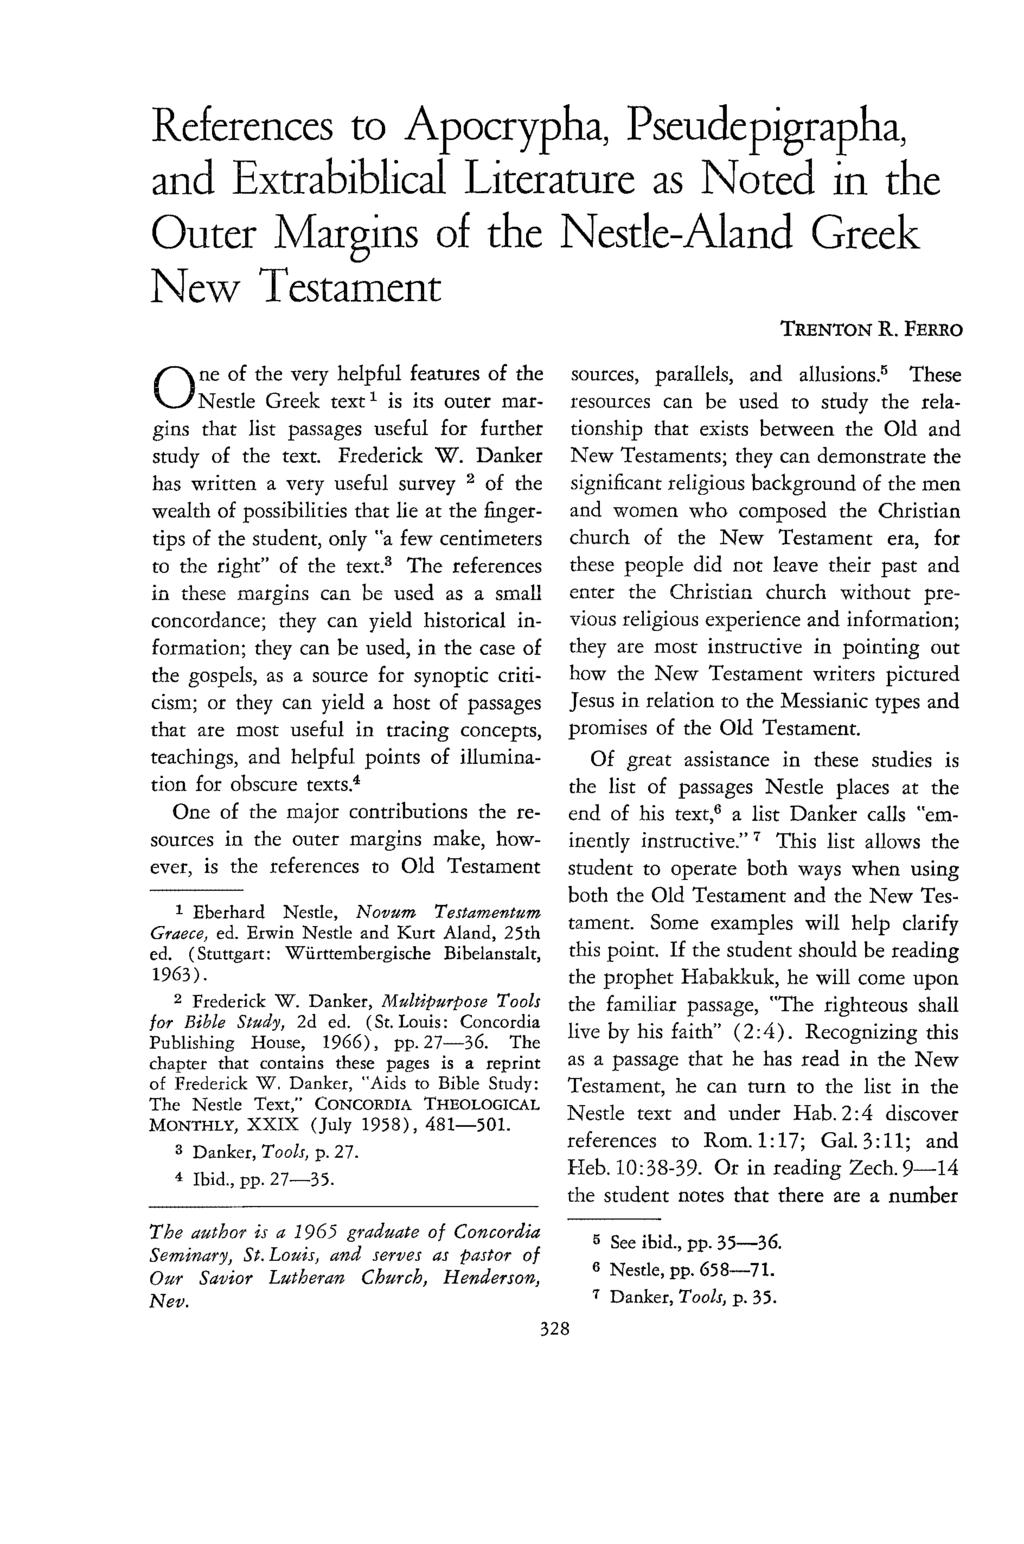 References to Apocrypha, Pseudepigrapha, and Extrabiblical Literature as Noted in the Outer Margins of the Nestle-Aland Greek New Testament One of the very helpful features of the Nestle Greek text 1